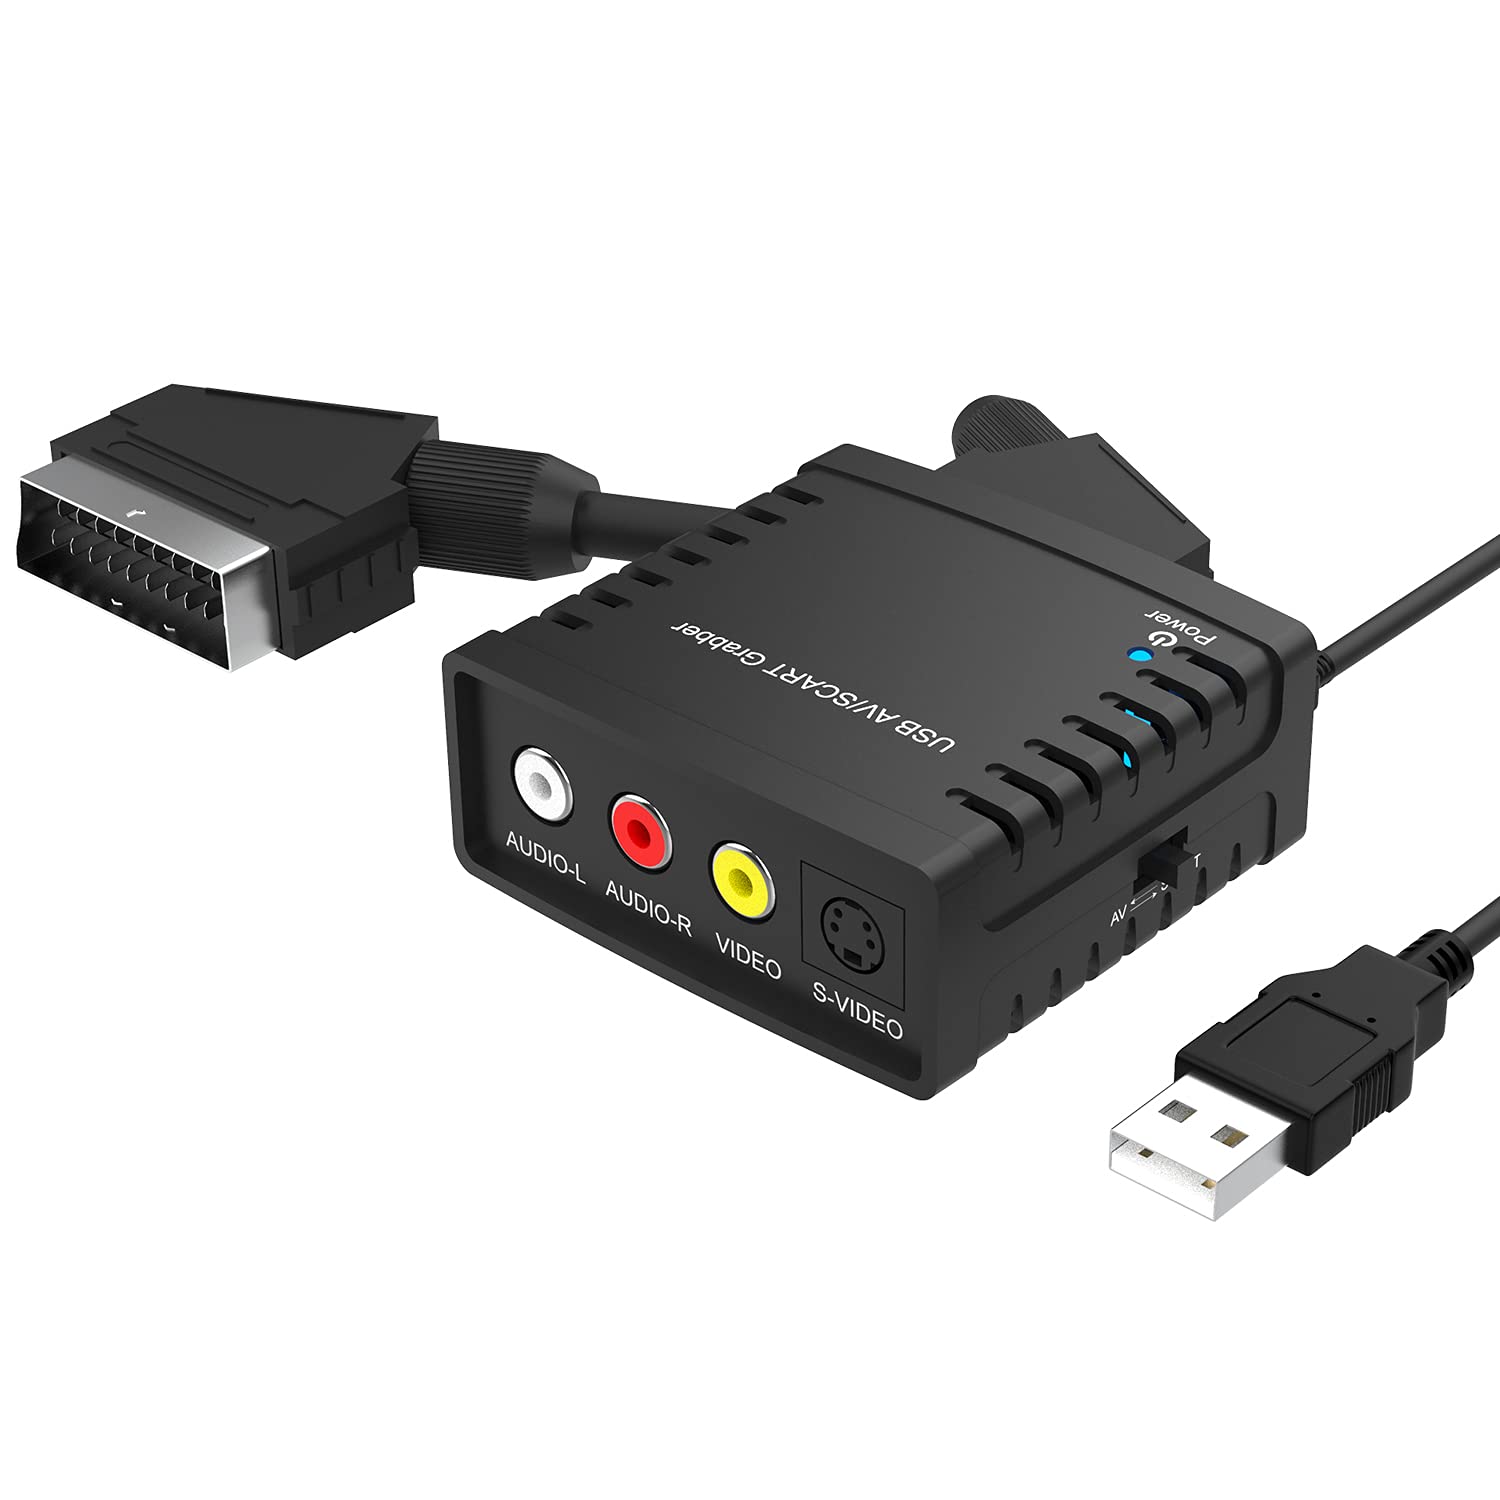 DIGITNOW USB 2.0 Video Capture Card Device Video Grabber One Touch VHS VCR  TV to DVD Converter, Transfer VHS Home Videos to Mac OS X PC Windows 7 8  10-USB Video Grabber-DIGITNOW!